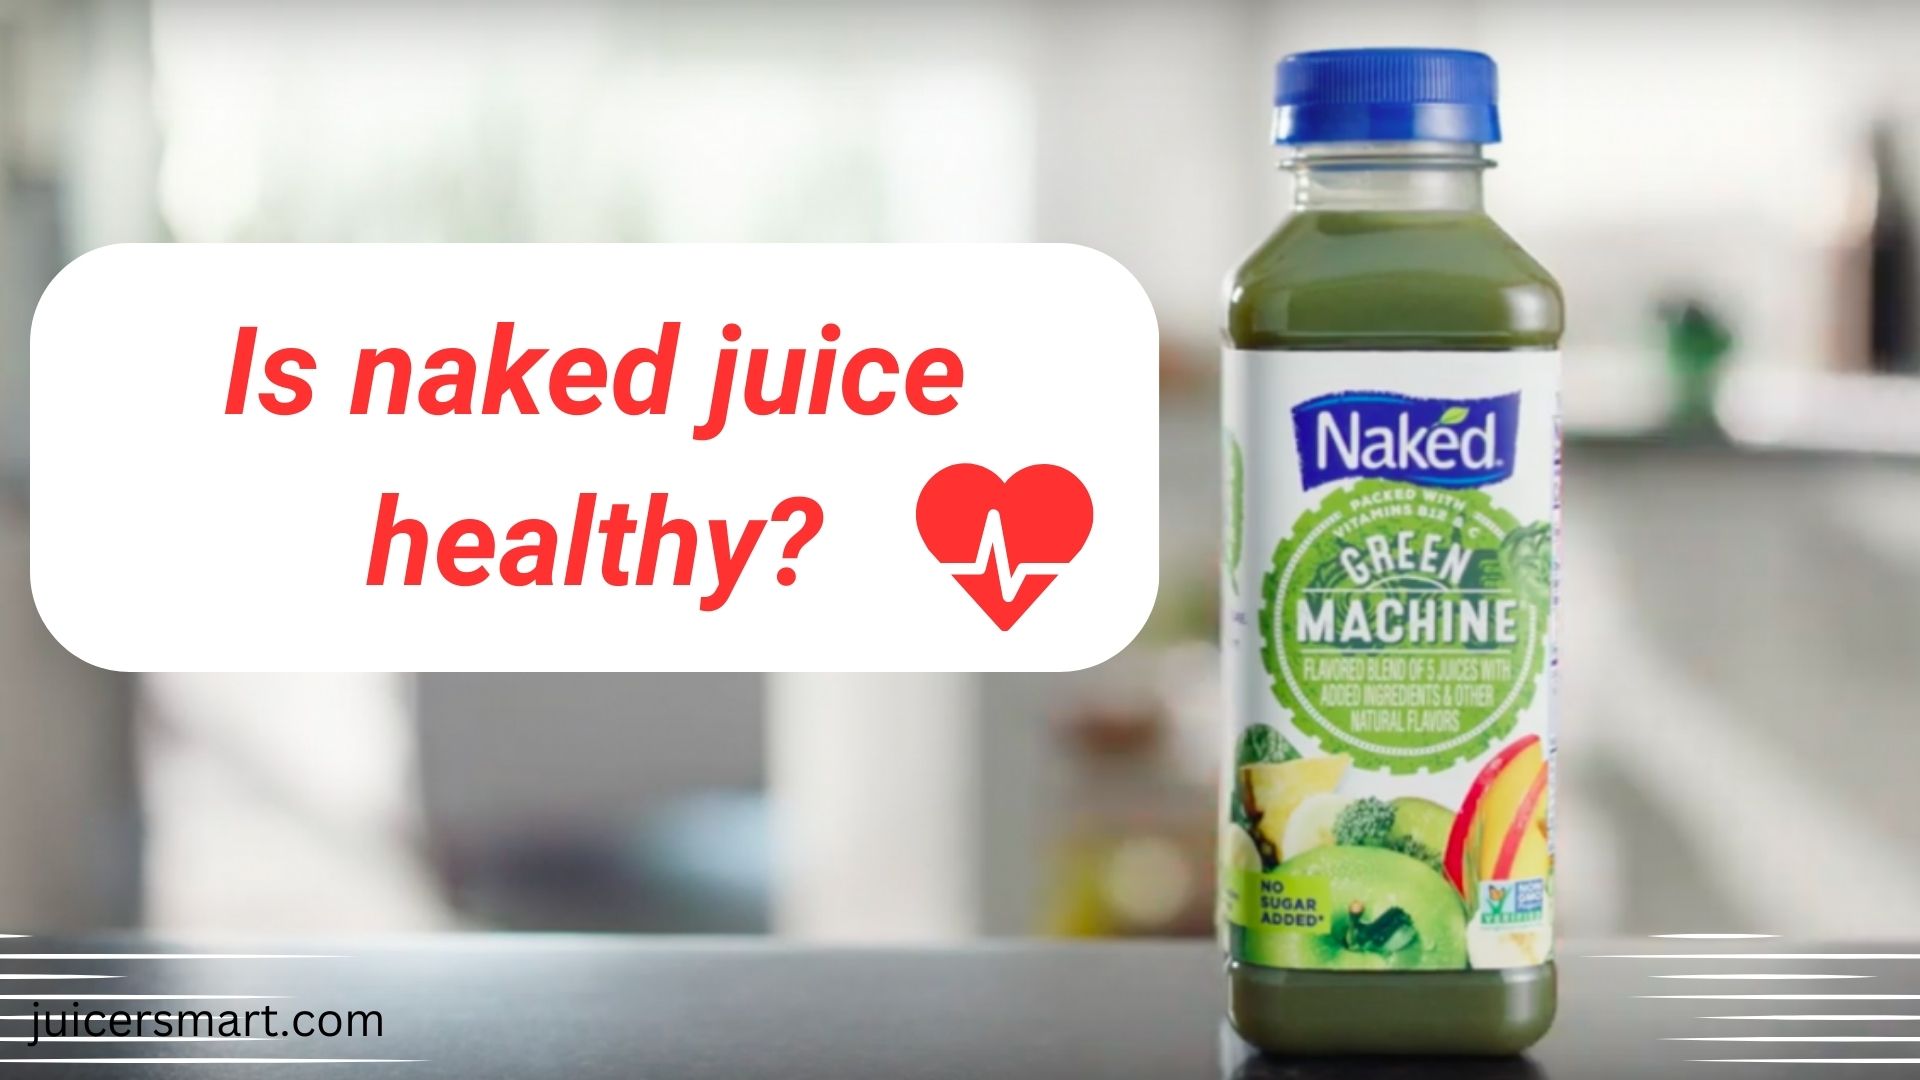 Is naked juice healthy